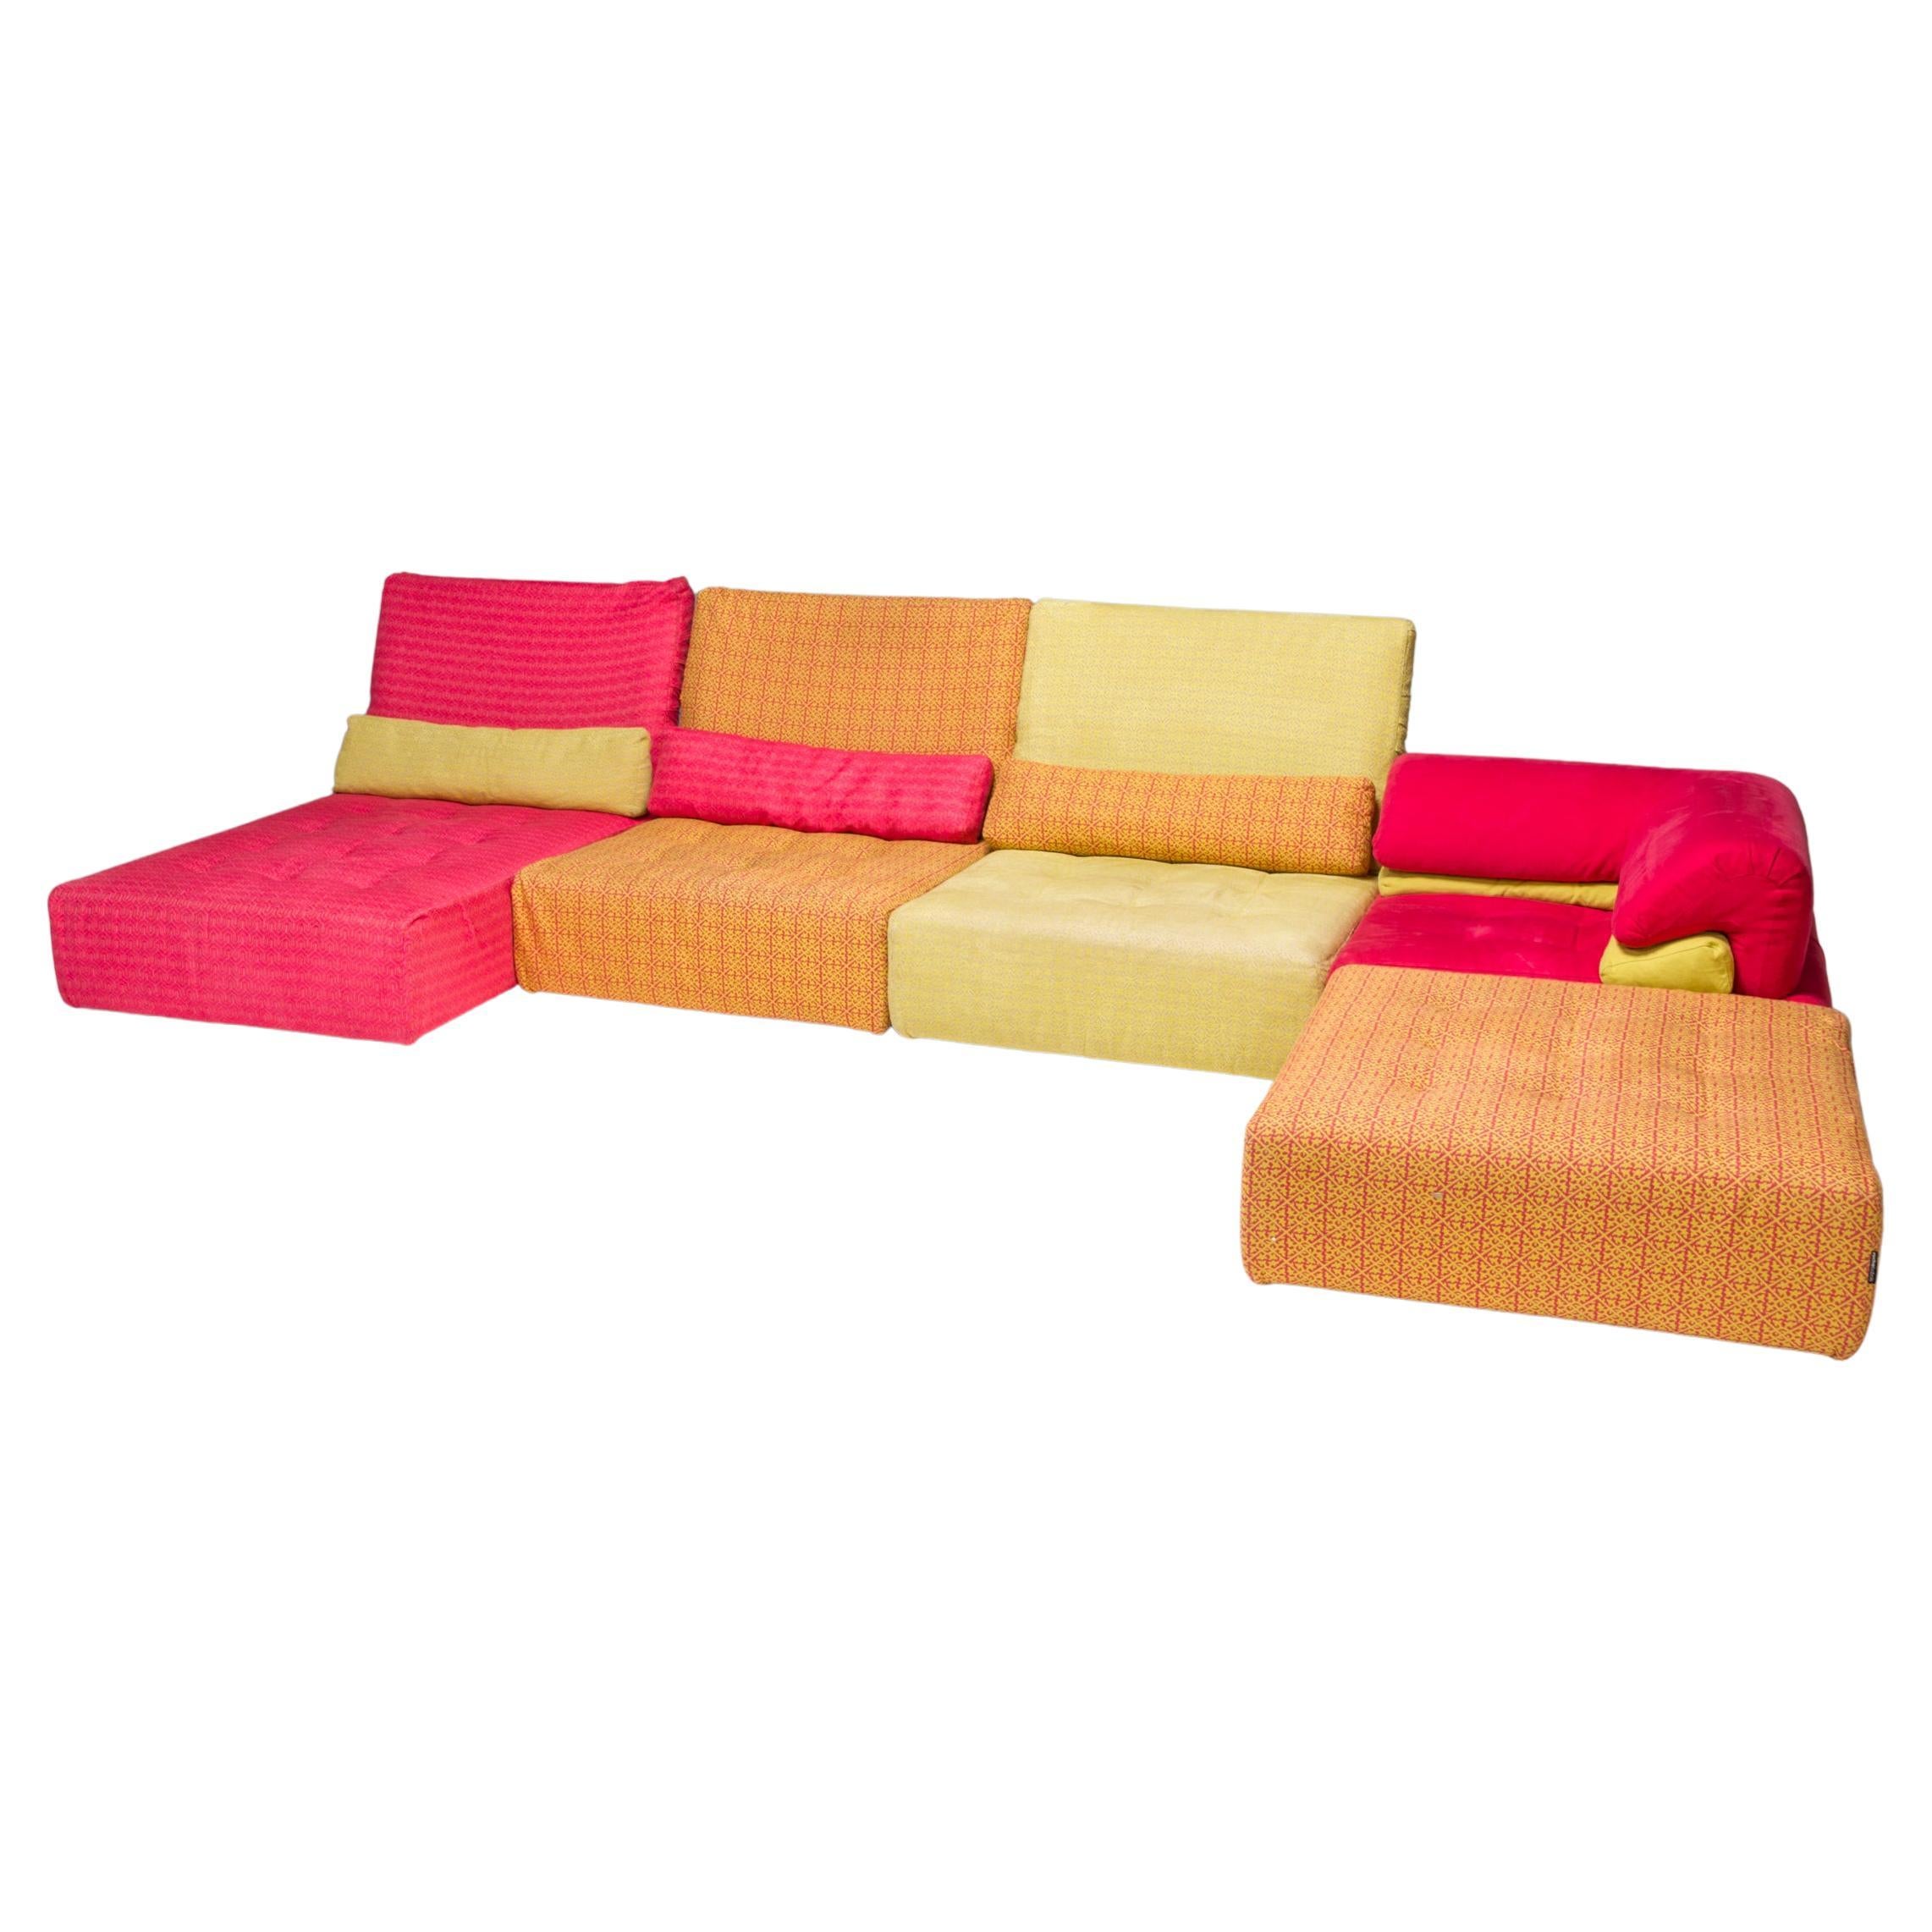 Roche Bobois Voyage Immobile Sectional Sofa with Kenzo Upholstery, Set of 5